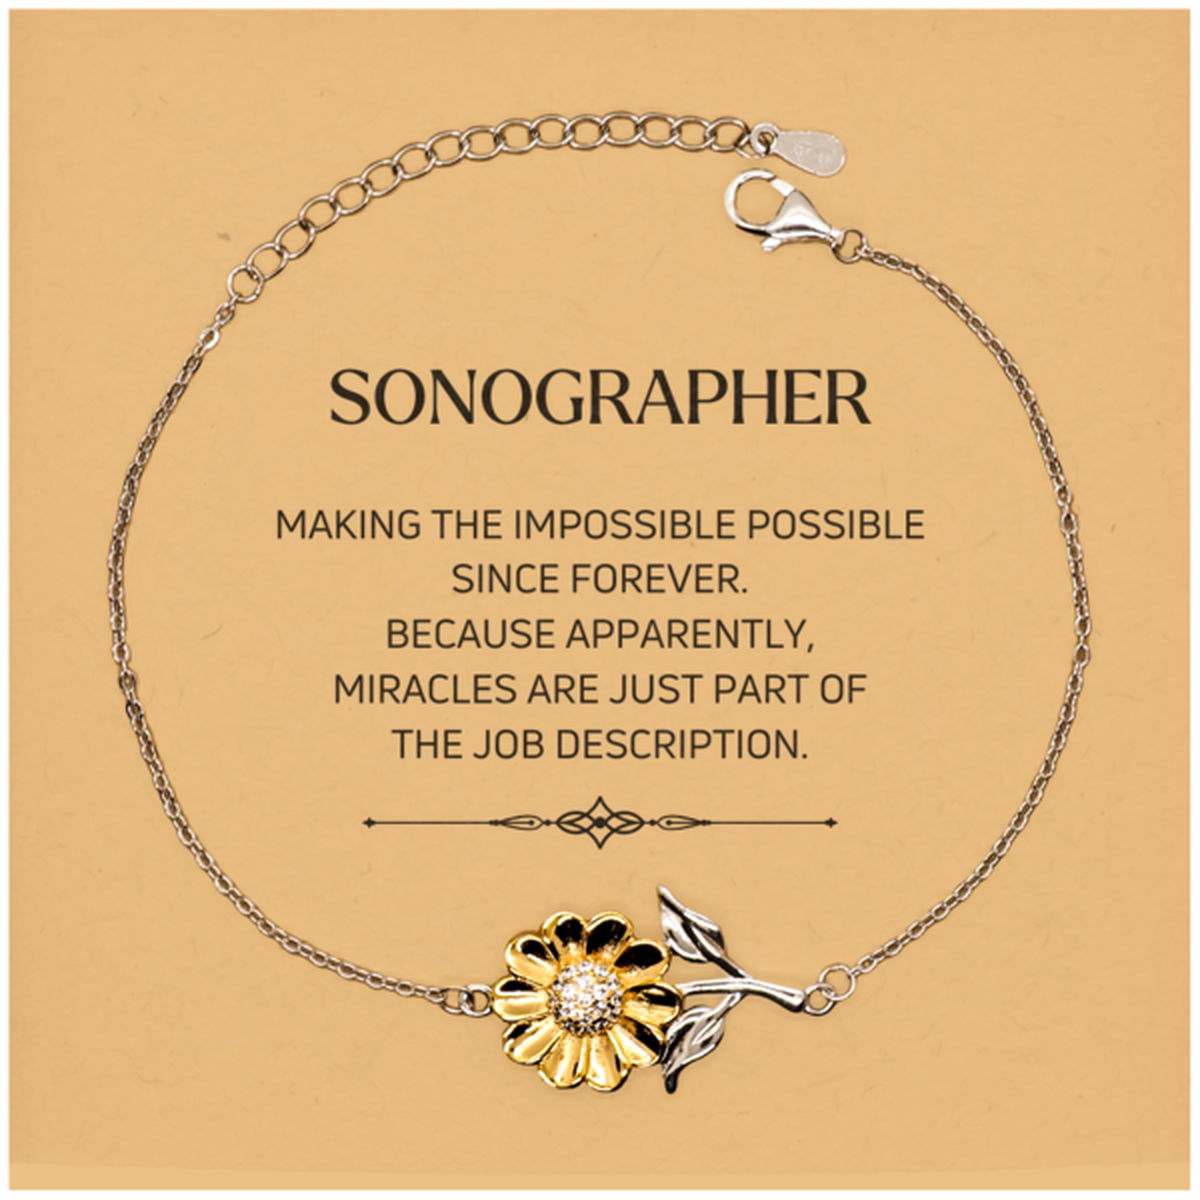 Funny Sonographer Gifts, Miracles are just part of the job description, Inspirational Birthday Christmas Sunflower Bracelet For Sonographer, Men, Women, Coworkers, Friends, Boss